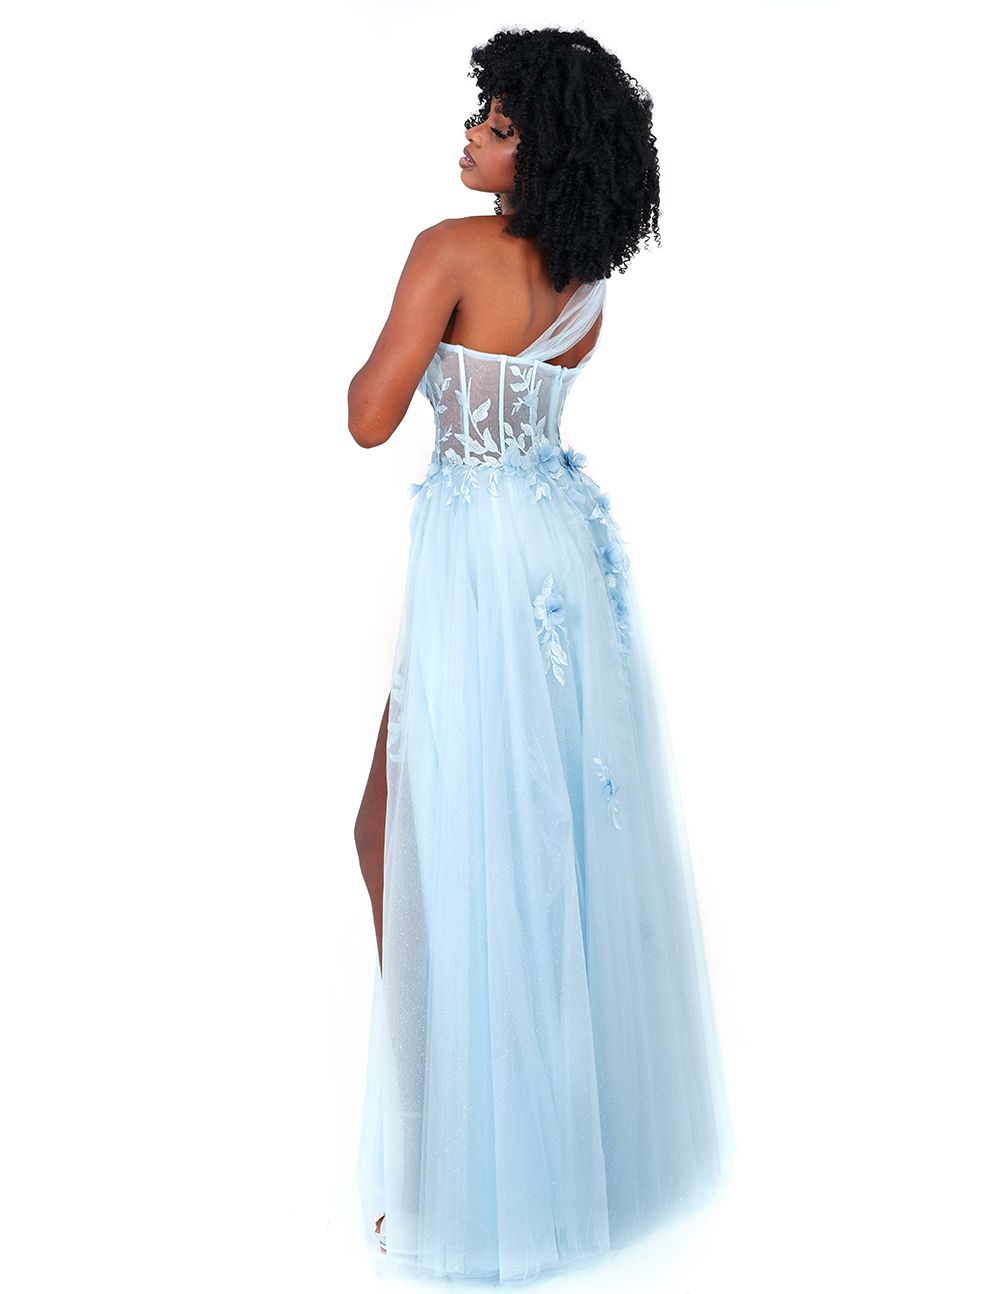 The Cecilia Couture 1516 is a modern and stylish formal dress with eye-catching features including a sheer lace shimmers, delicate one shoulder corset and an A-line tulle skirt. Perfect for special occasions and prom, this gorgeous dress will make you stand out. Slit skirt  Sizes: 0-16  Colors: Lemon, Sky Blue